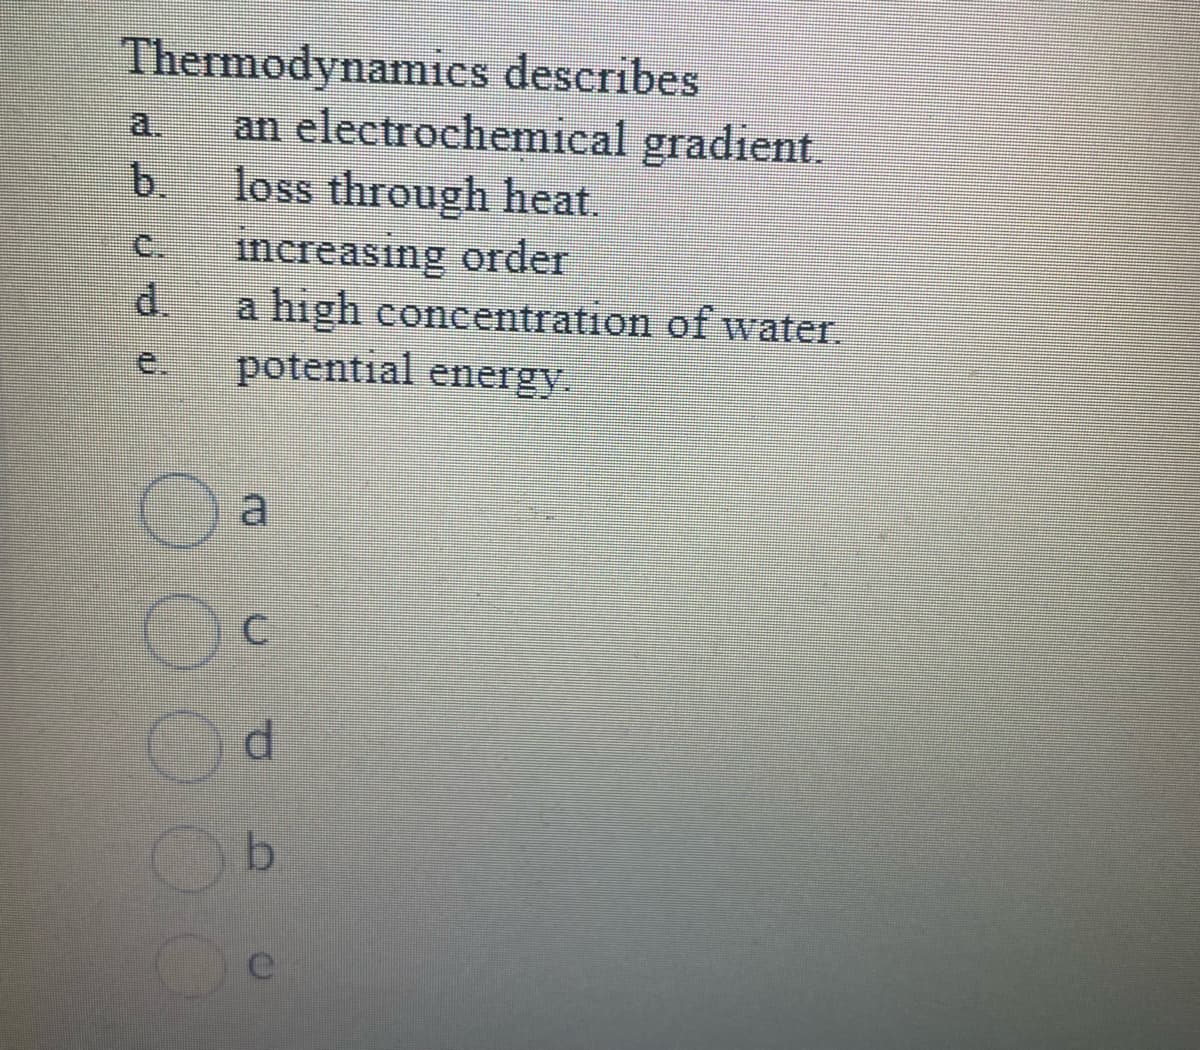 Thermodynamics describes
an electrochemical gradient.
loss through heat.
increasing order
a high concentration of water.
potential energy.
C
d
b